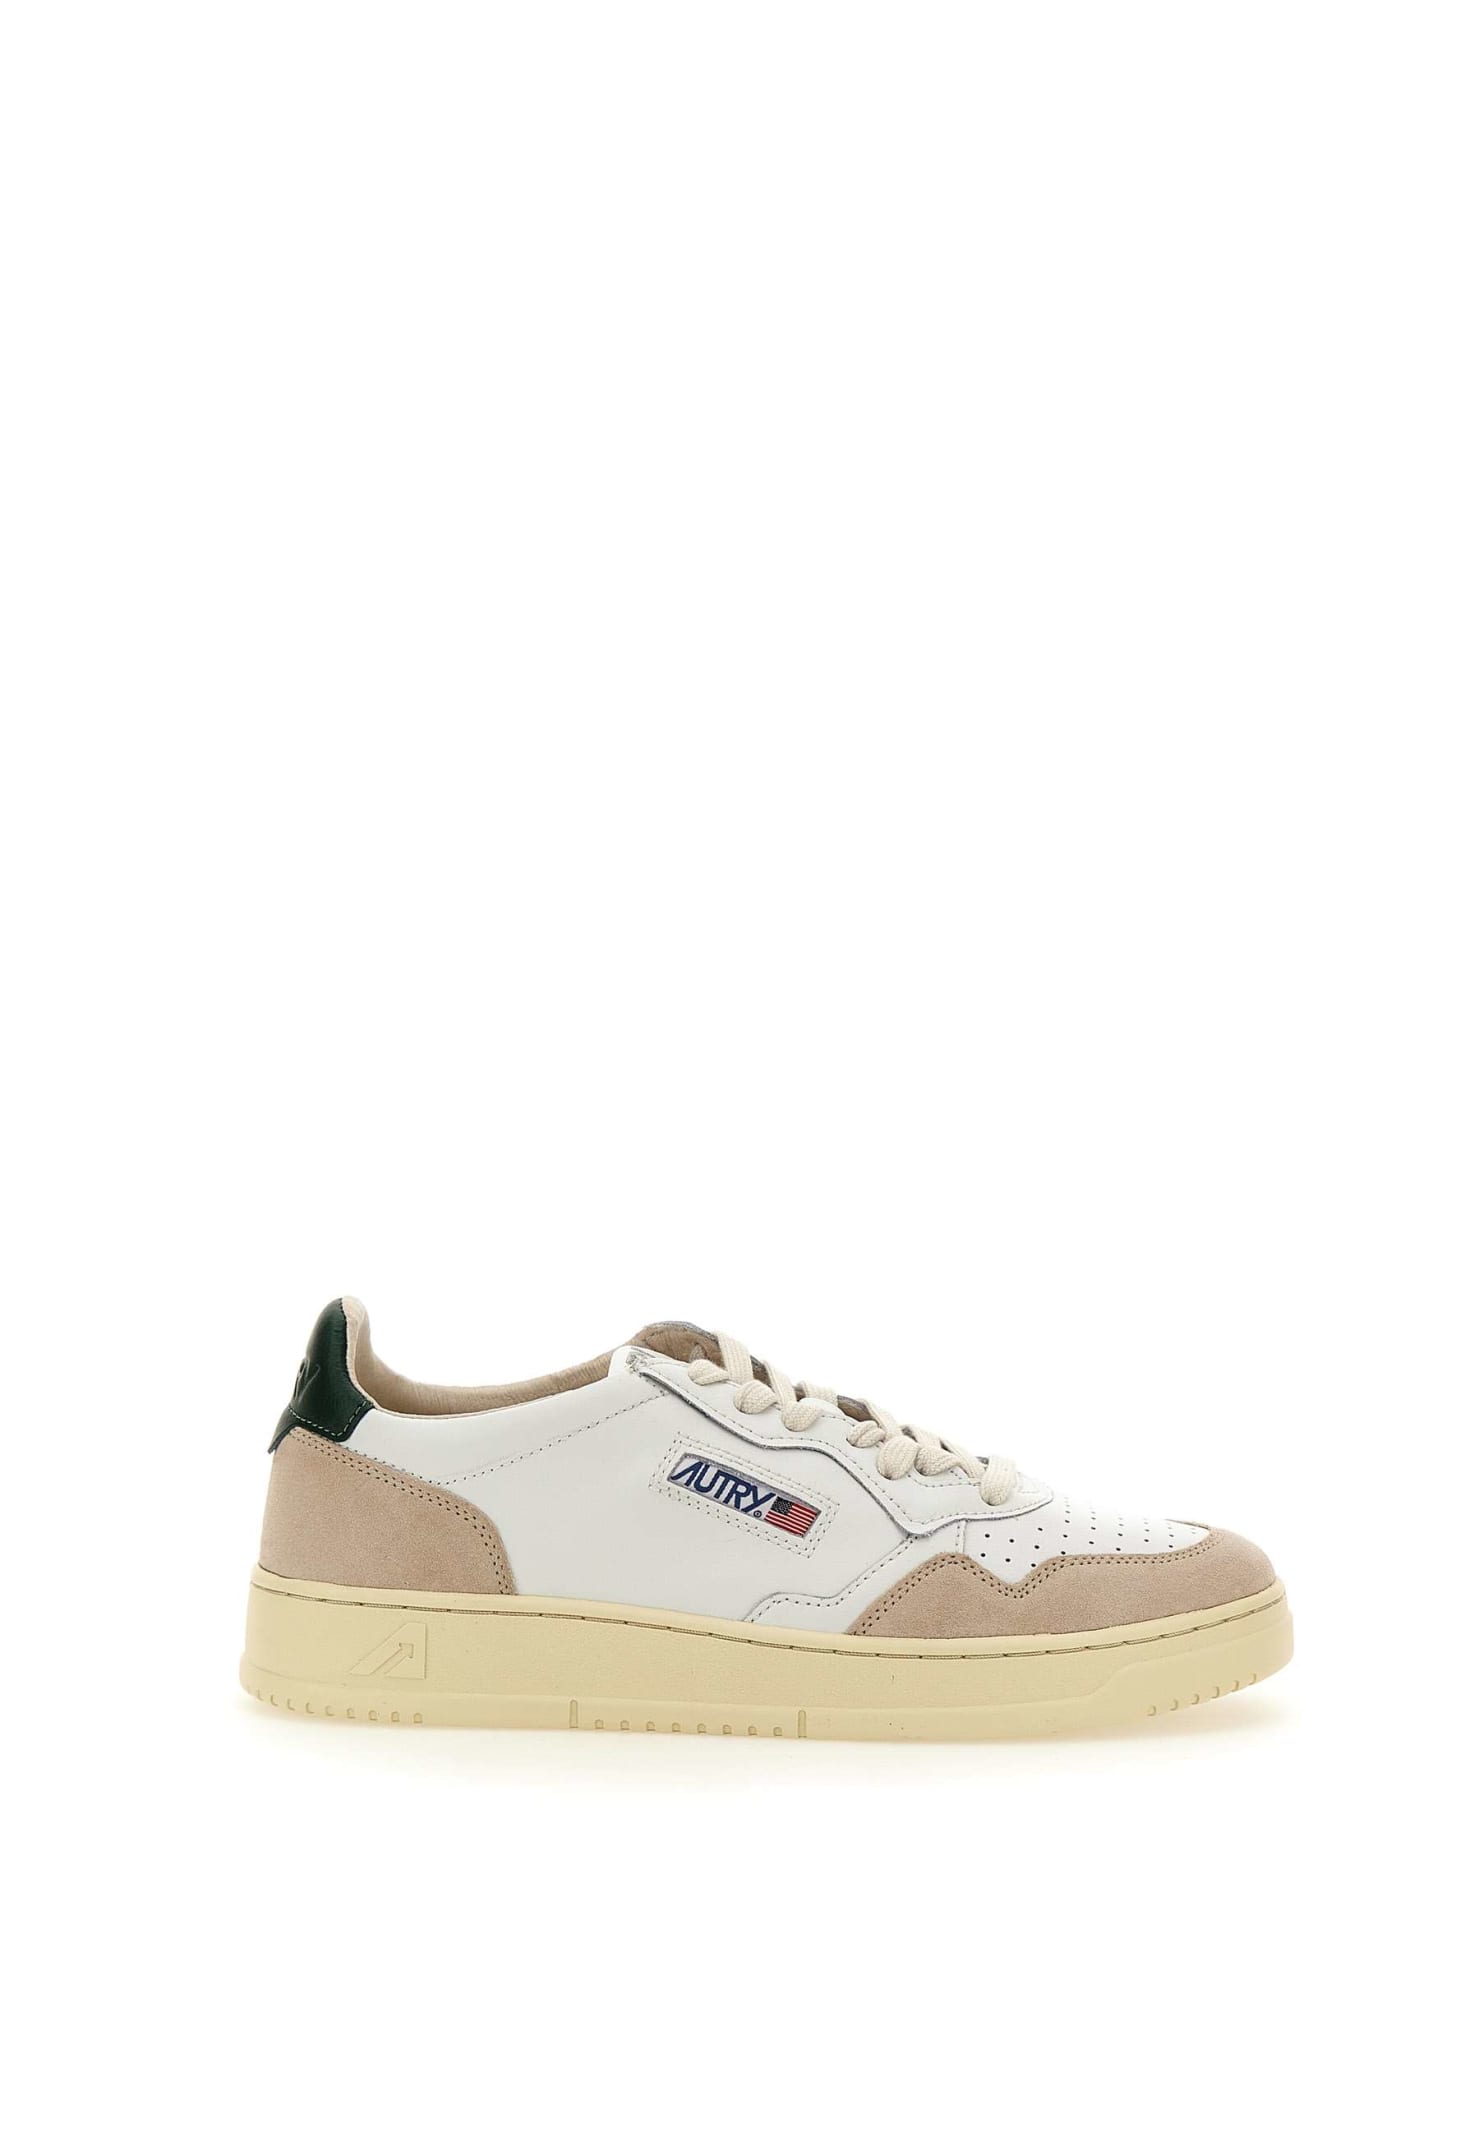 Shop Autry Aulm Ls56 Sneakers In White-green